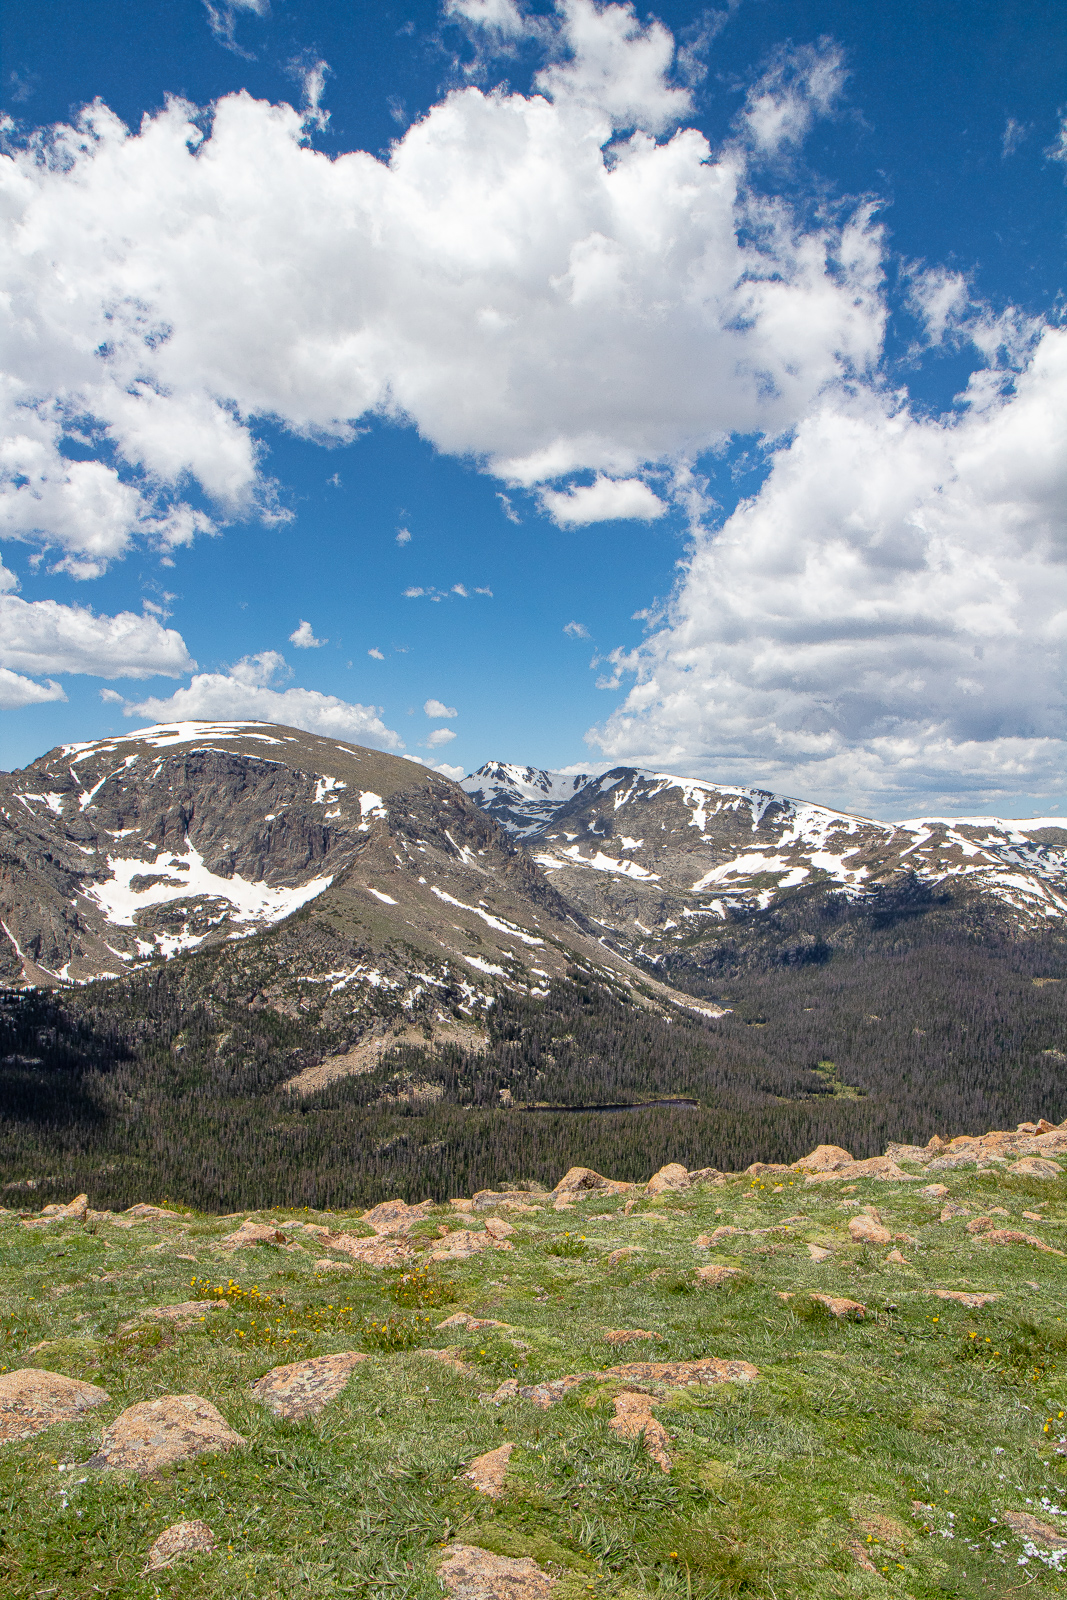 Forest Canyon Overlook on Trail Ridge Road in Rocky Mountain National Park